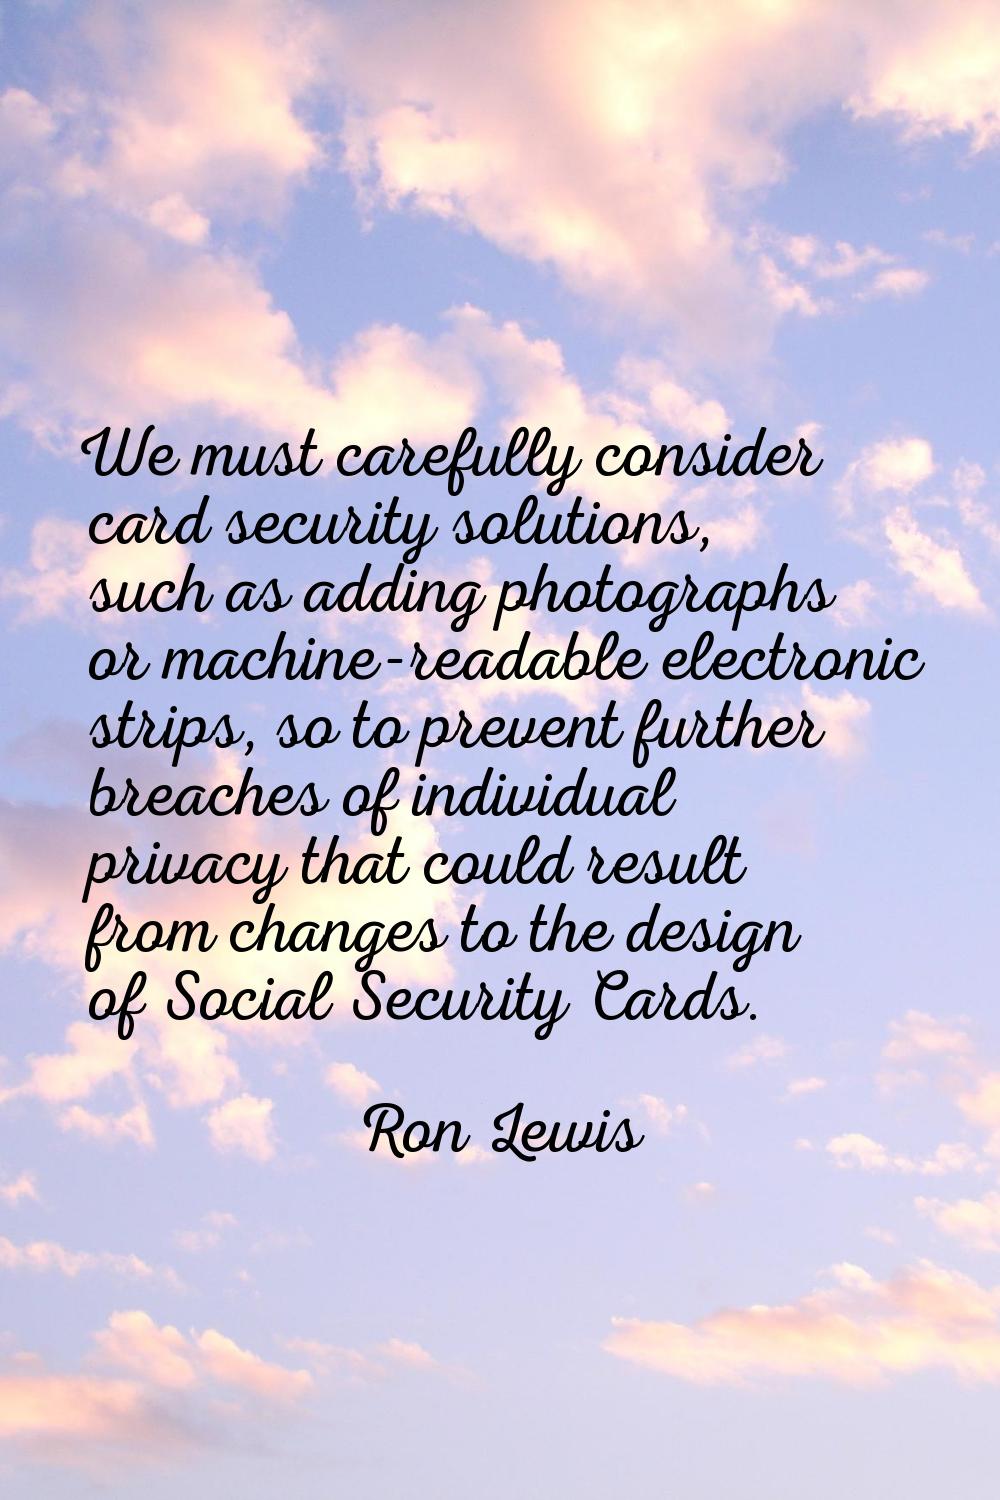 We must carefully consider card security solutions, such as adding photographs or machine-readable 